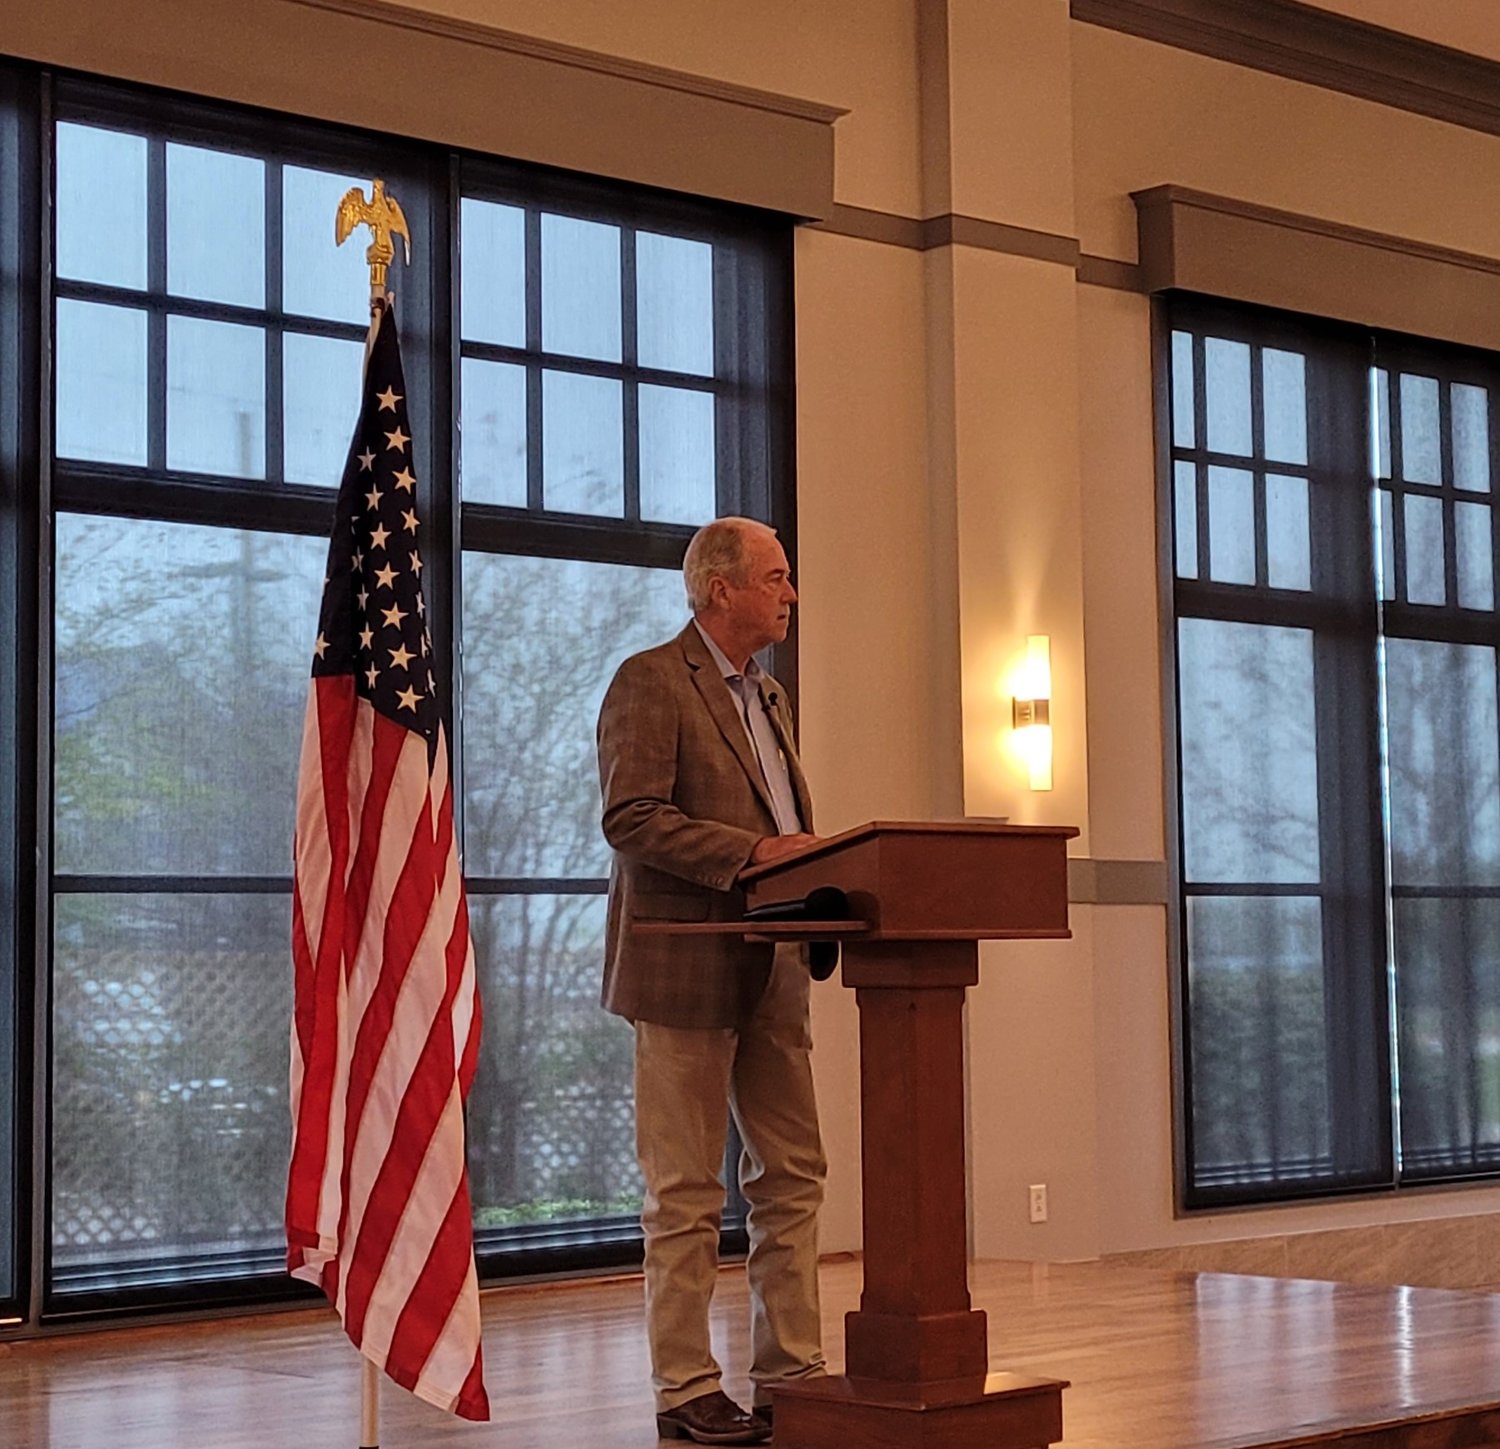 Katy Mayor Bill Hastings presented an update on the state of the city March 24. During the presentation, he praised city staff for their resiliency over the last year and said the city’s finances had come out better than expected due to sales tax proceeds from curbside service, warehouses and big box stores.